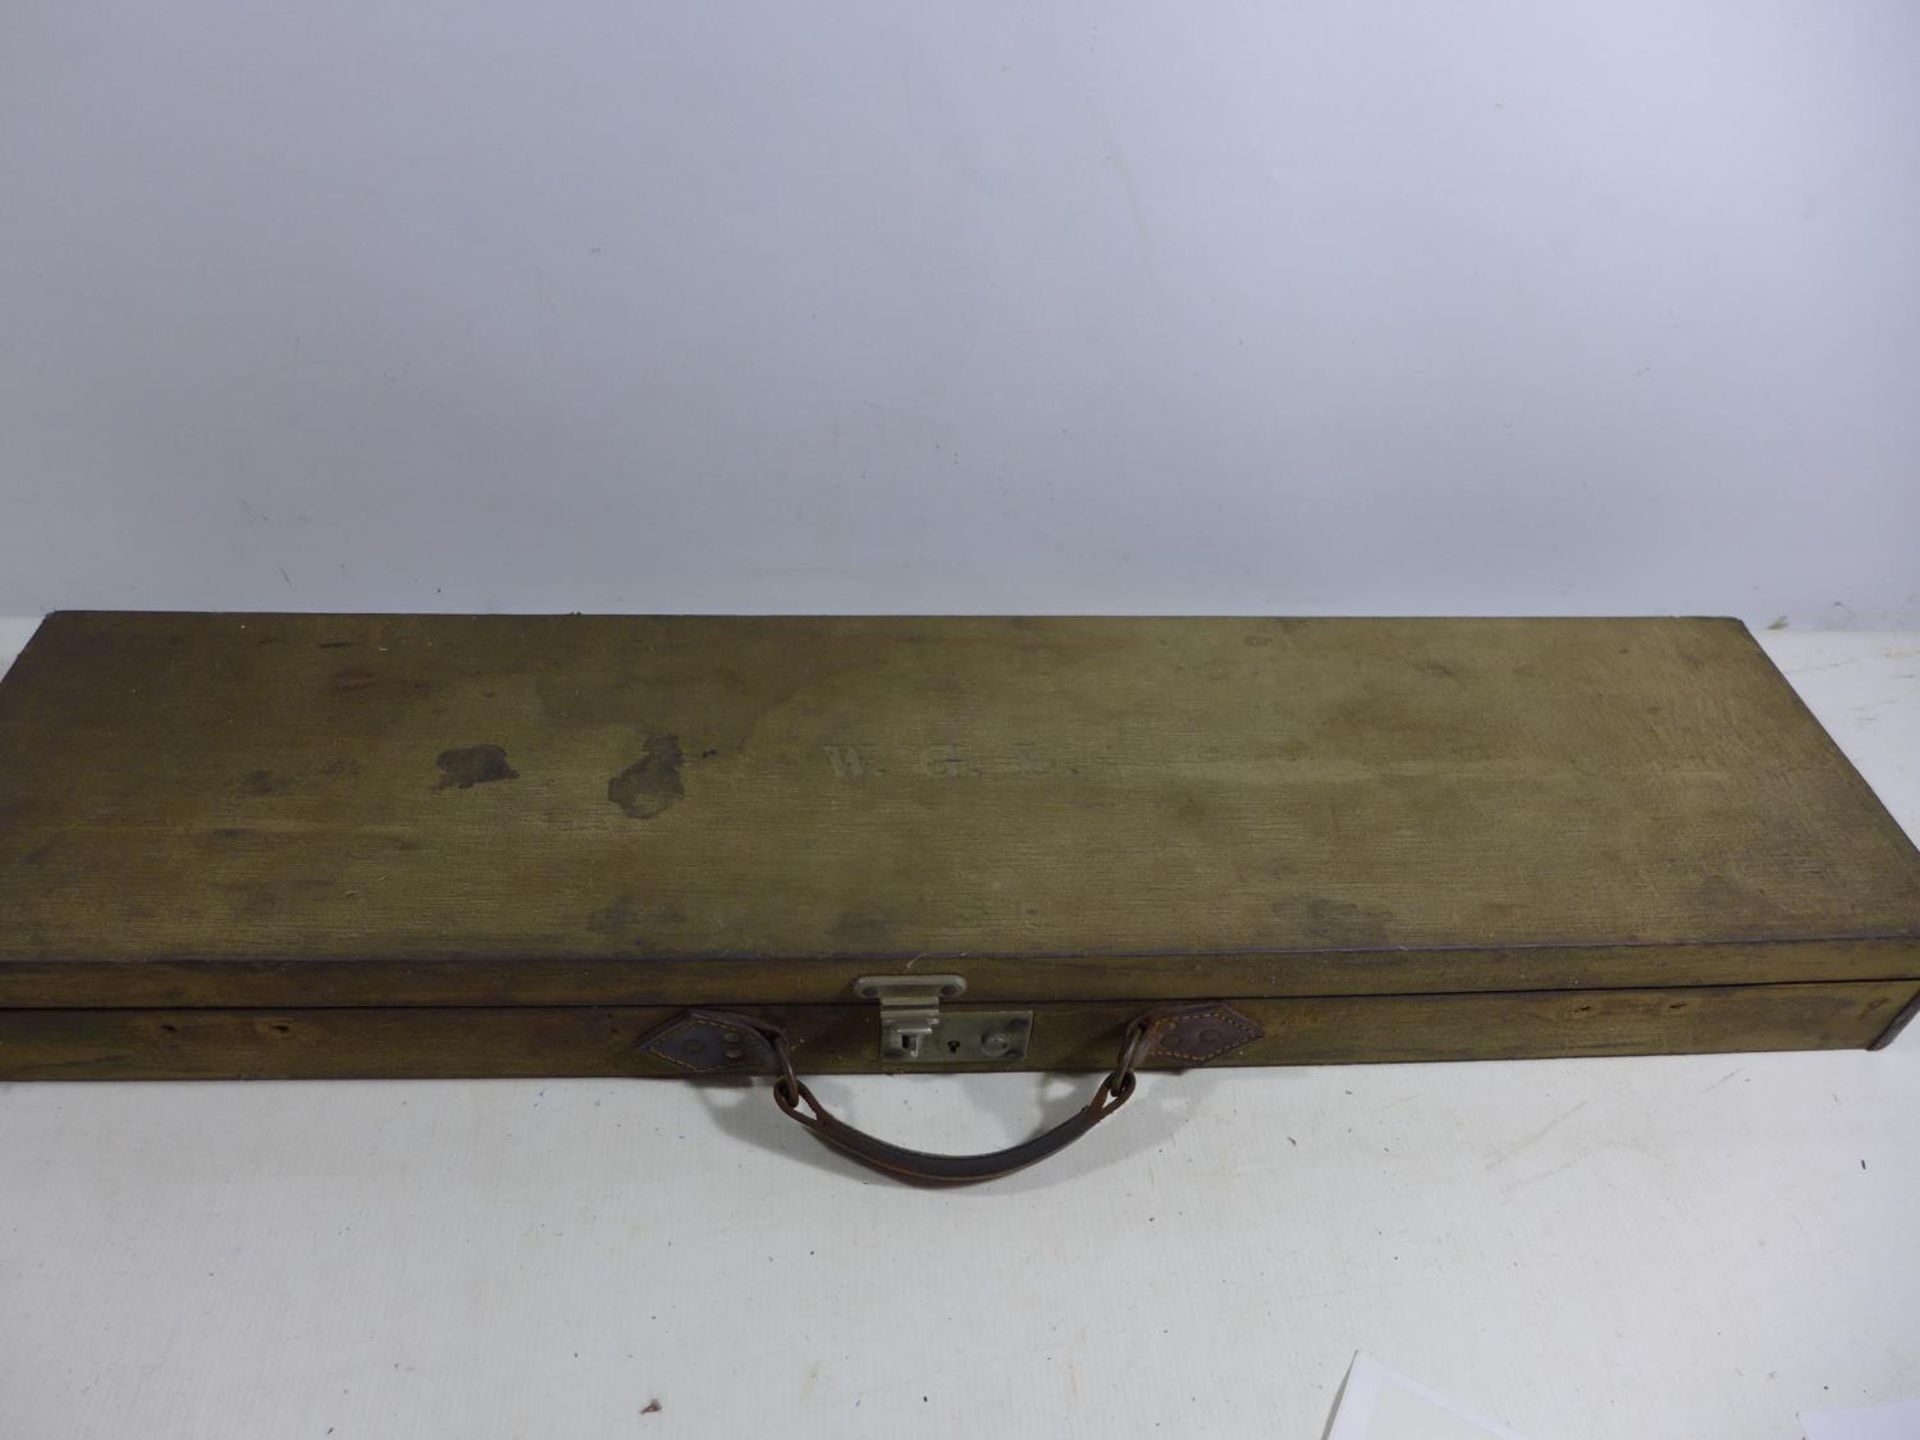 A COGSWELL AND HARRISON GUN CASE TO TAKE A 31 INCH BARREL GUN - Image 4 of 4